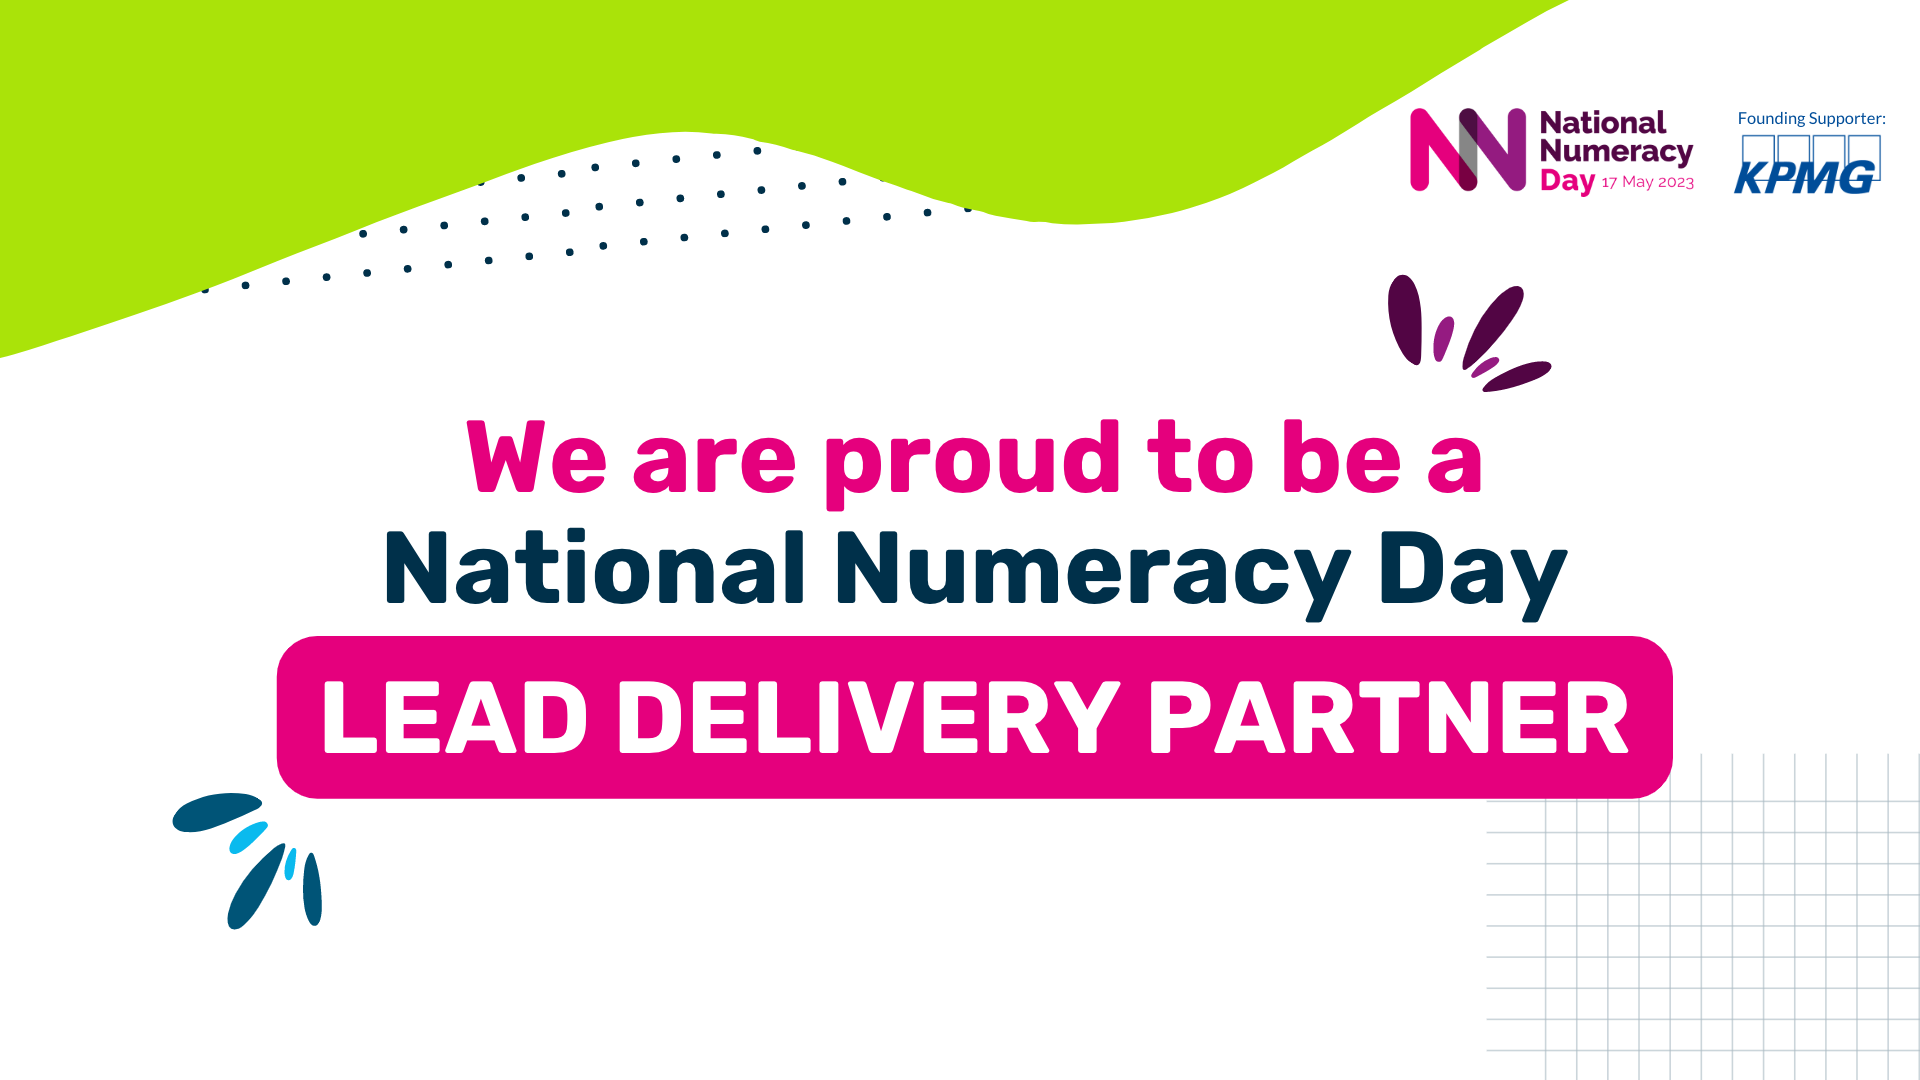 Graphic saying "We are proud to be a National Numeracy Day Lead Delivery Partner"